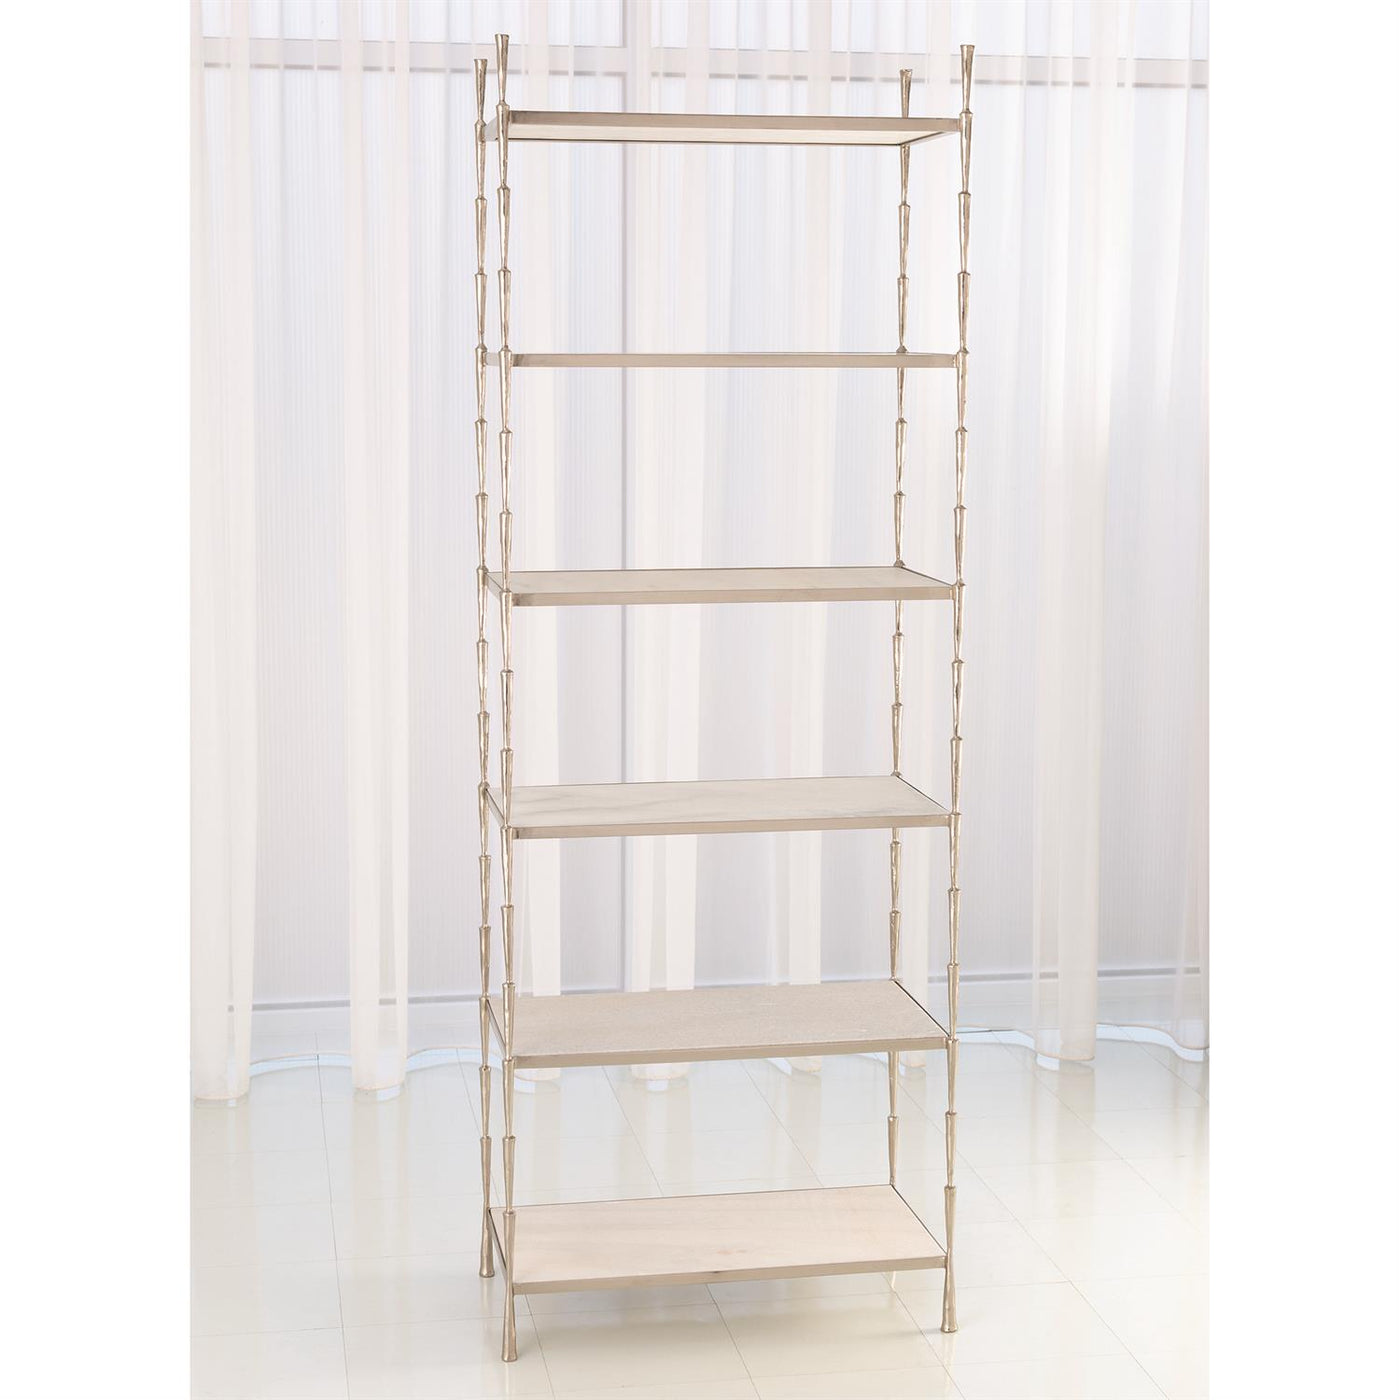 ETAGERE SPIKE ANTIQUE NICKEL WITH MARBLE SHELVES